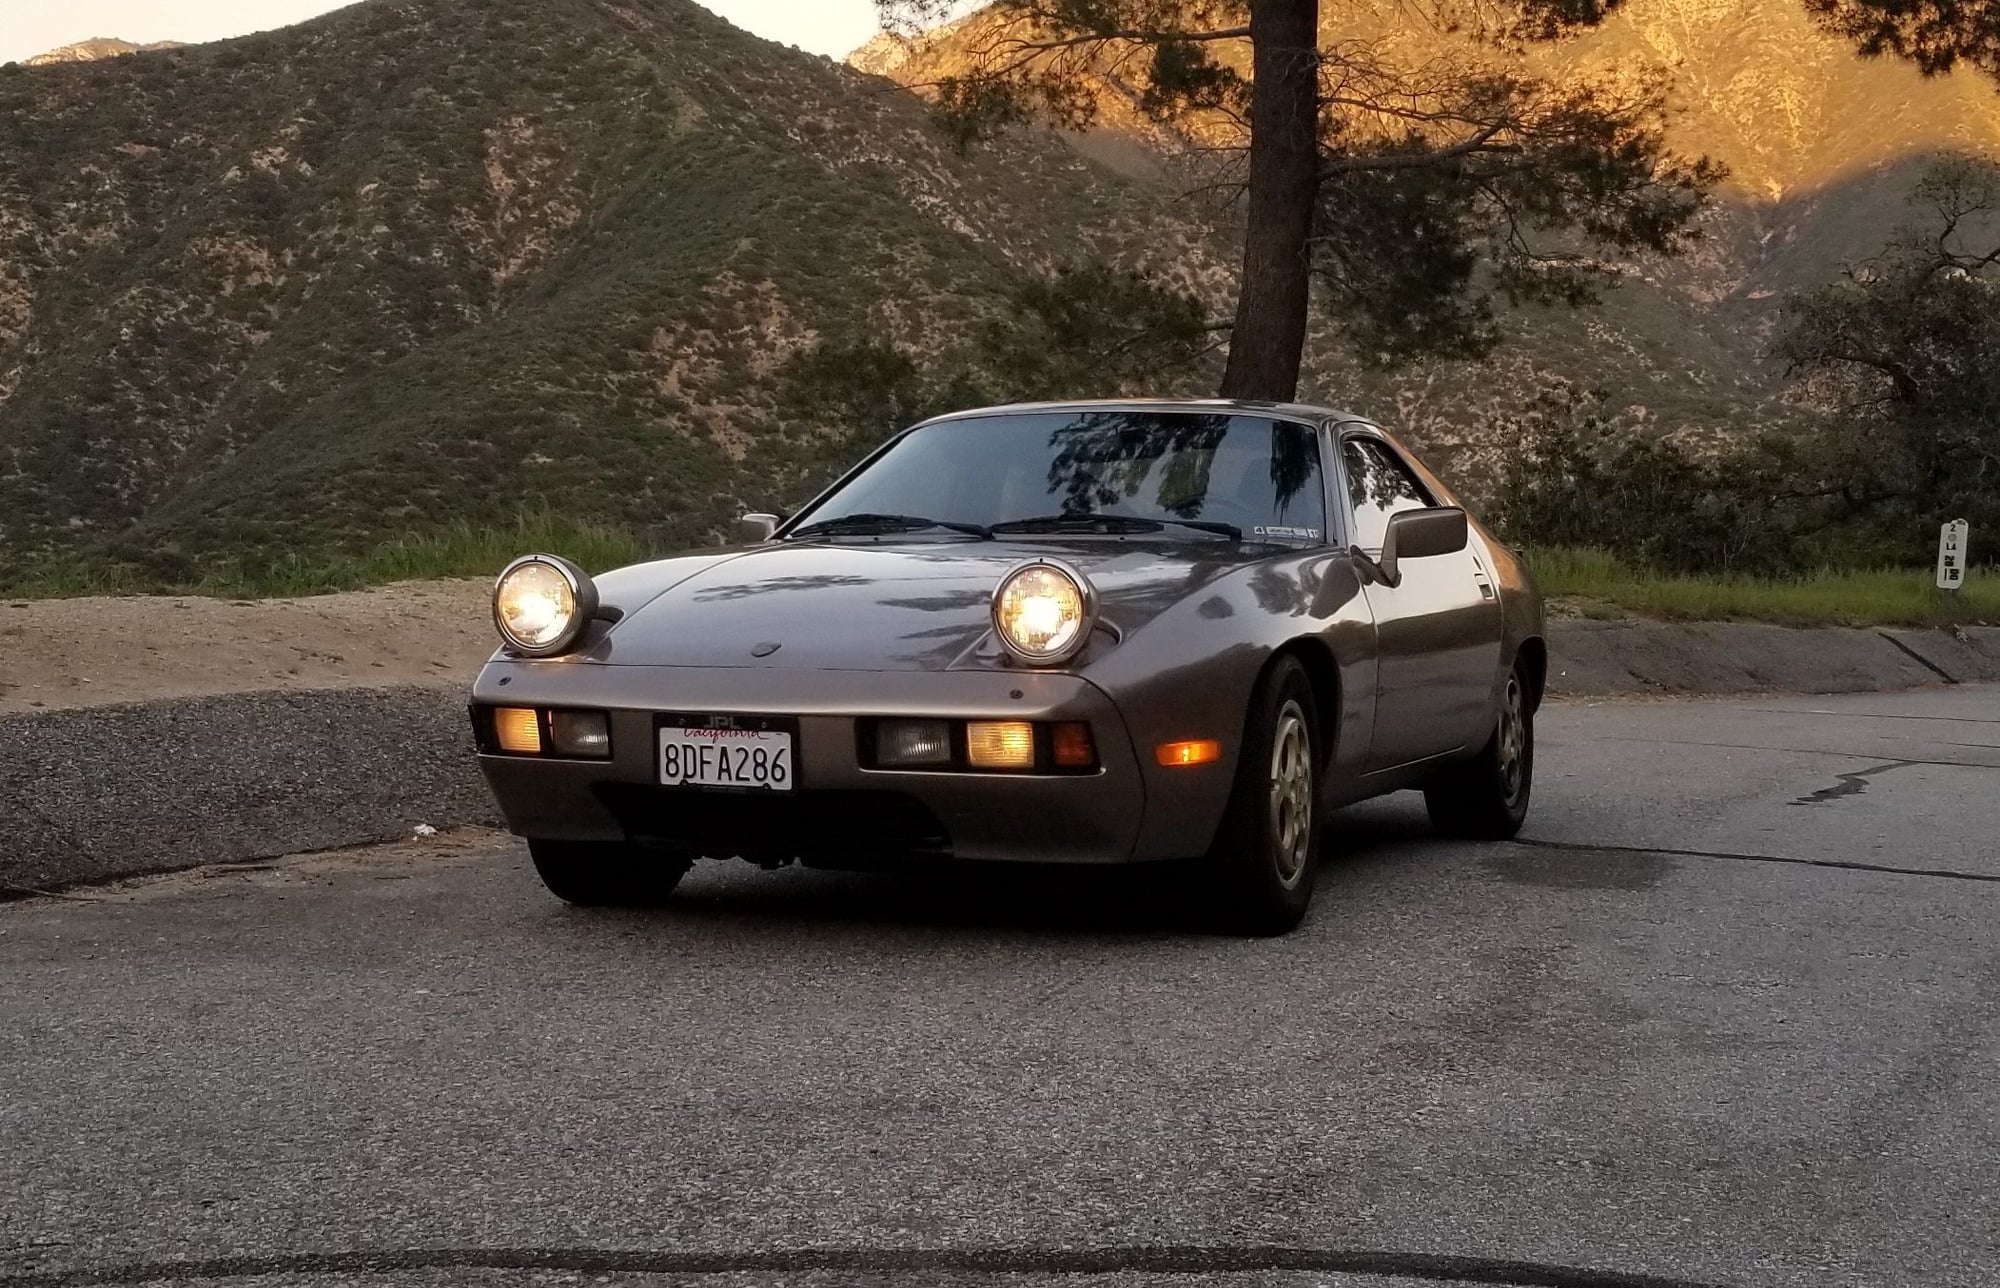 1981 Porsche 928 - 1981 Porsche 928 Auto 140k miles - Used - VIN WP0JA0920BS820334 - 140,800 Miles - 8 cyl - 4WD - Automatic - Coupe - Gold - South Pasadena, CA 91030, United States